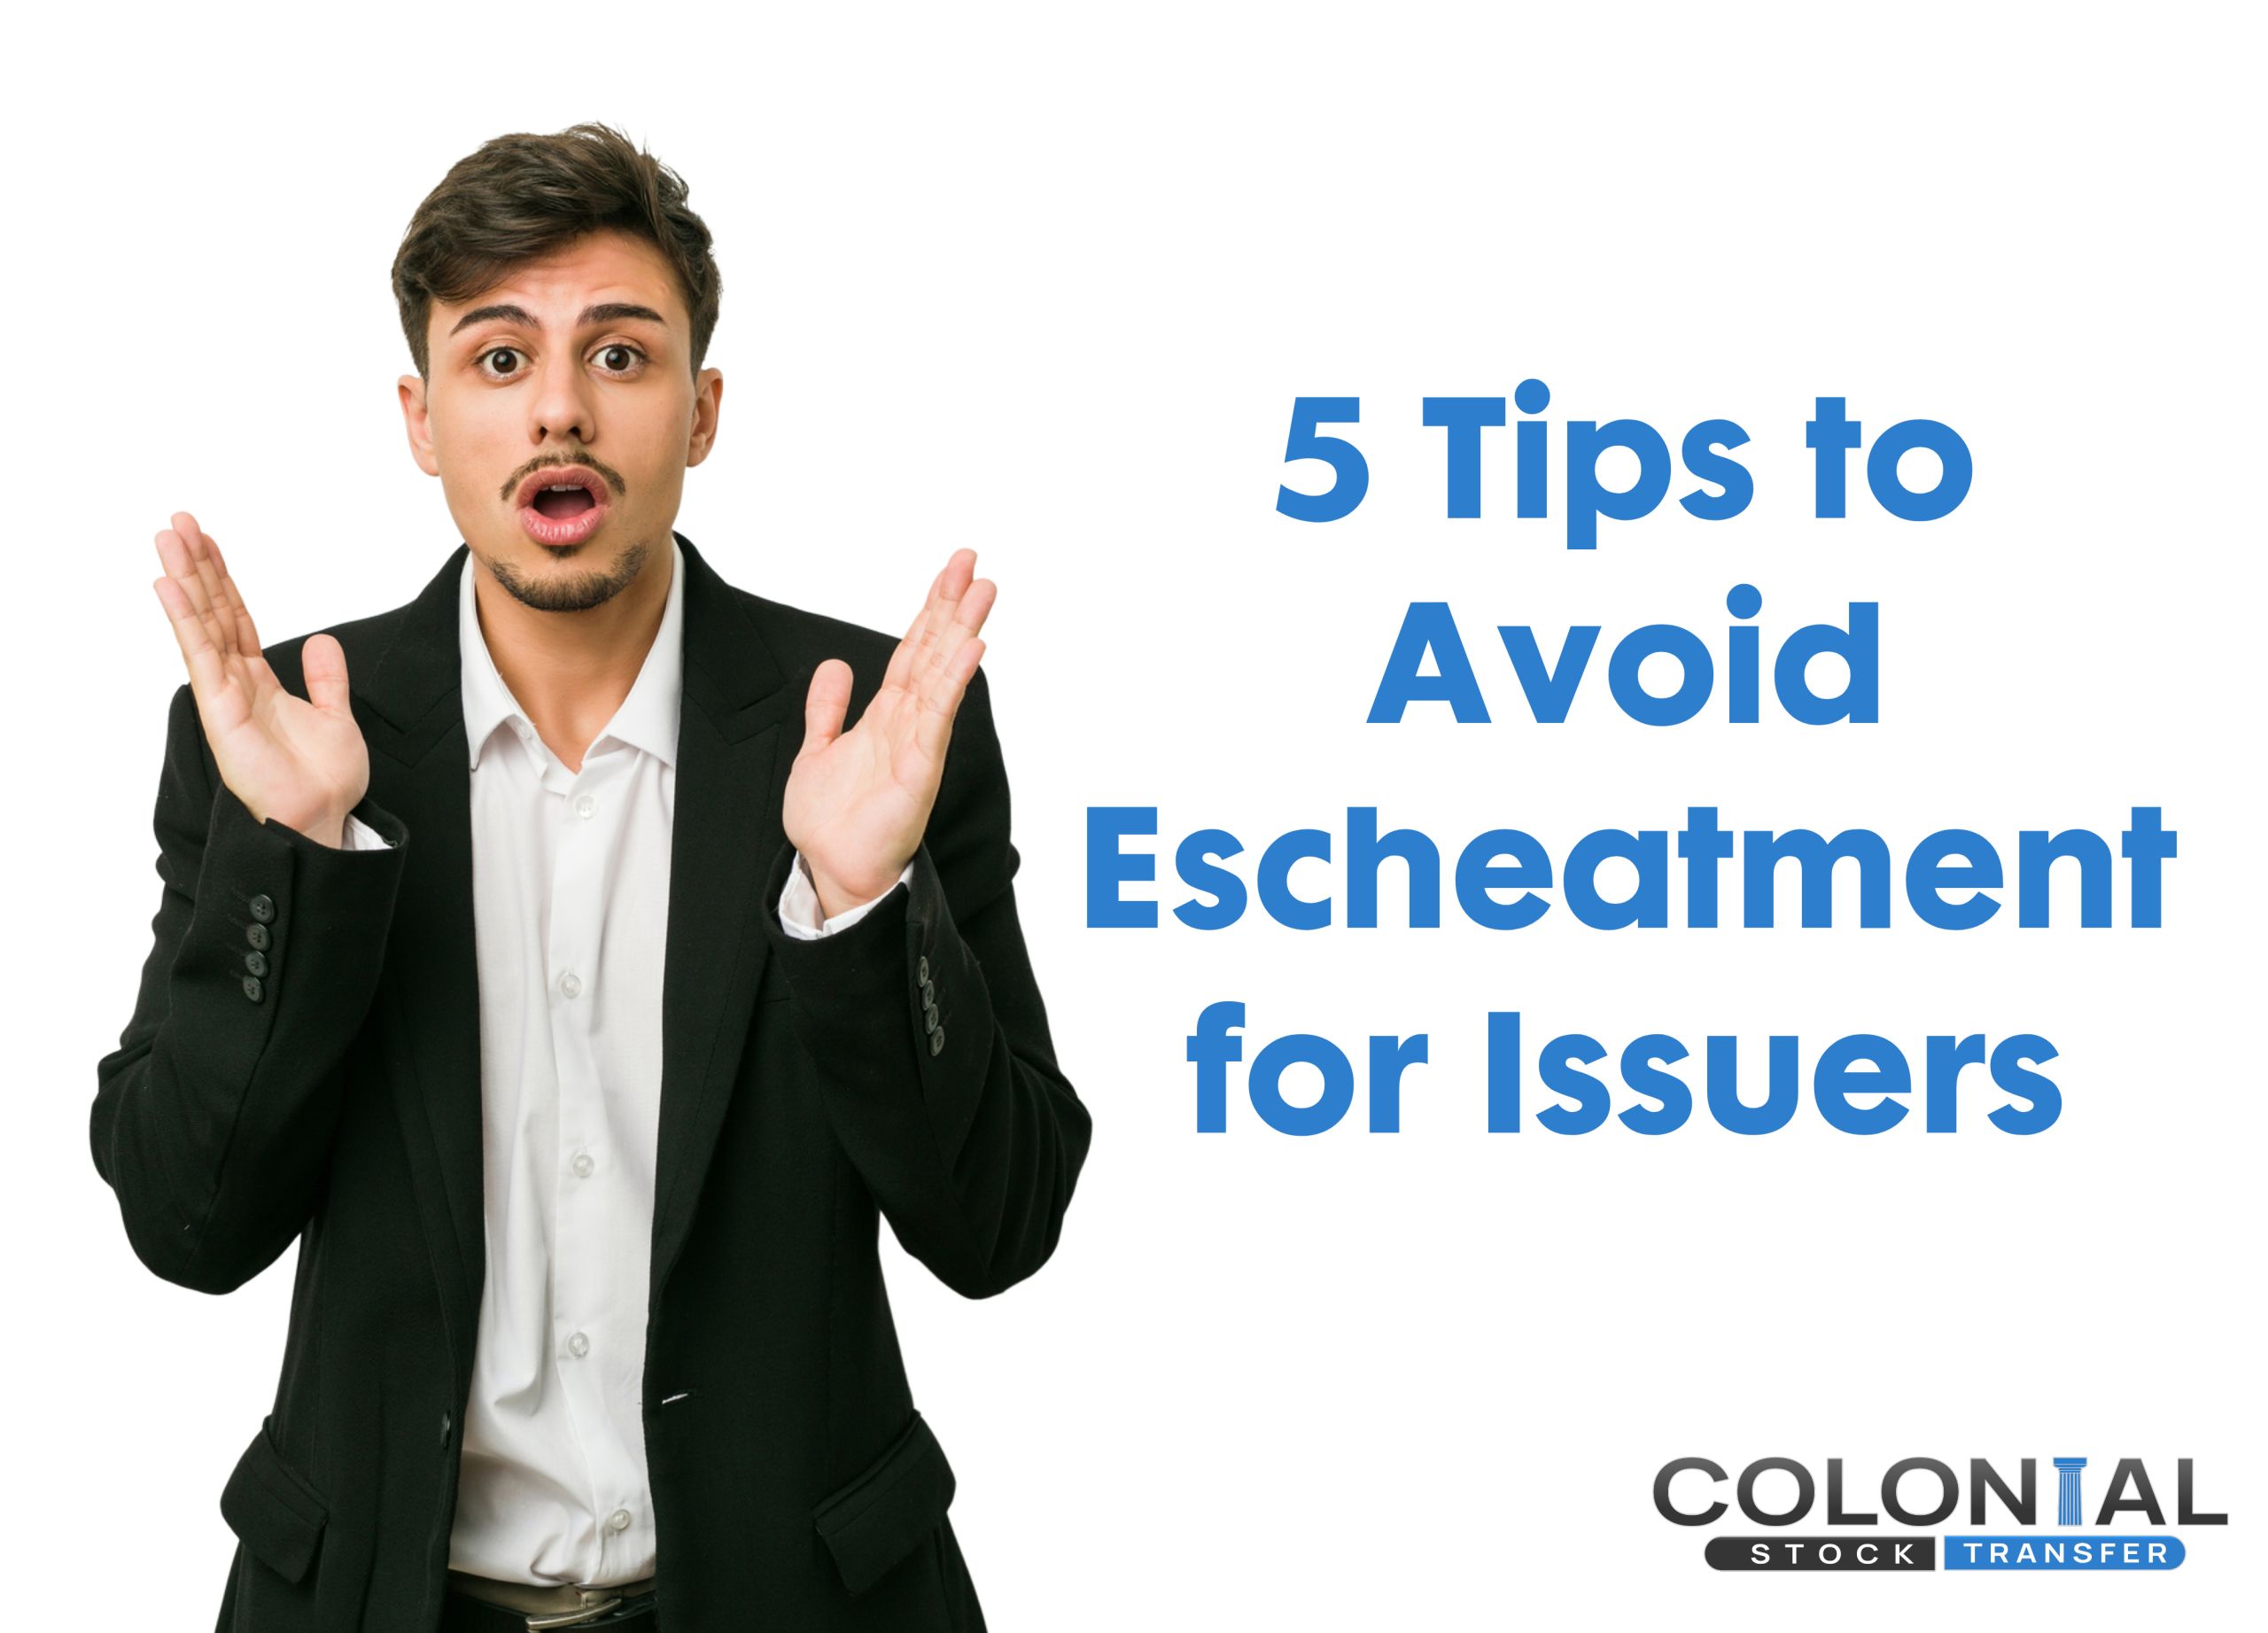 5 Tips to Avoid Escheatment for Issuers